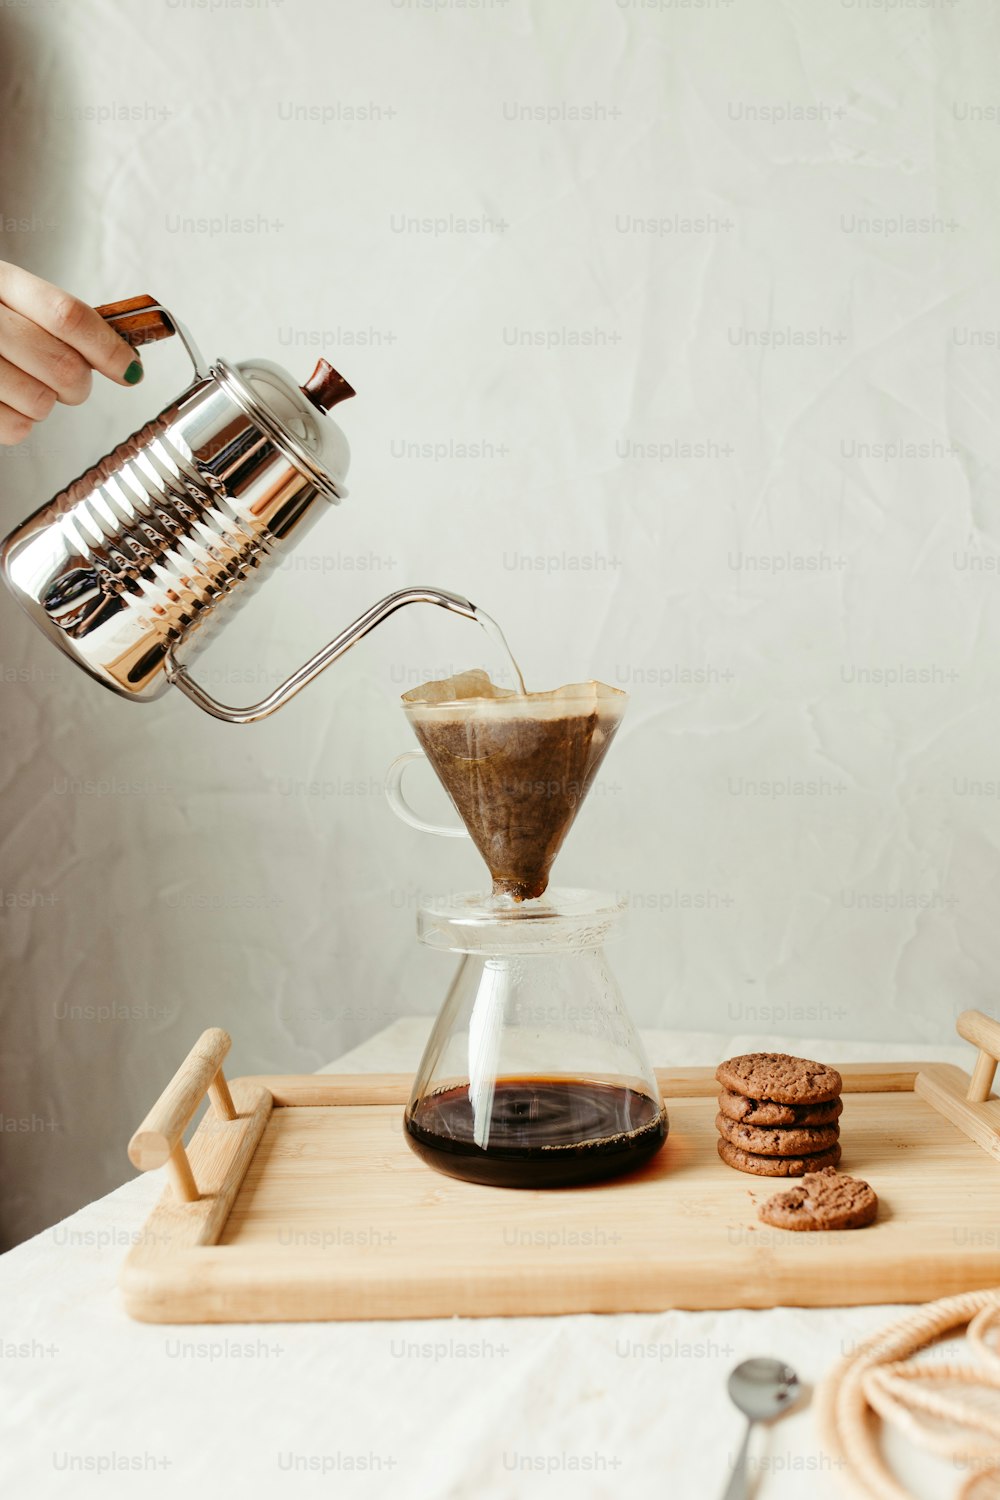 a person pours coffee into a glass pitcher